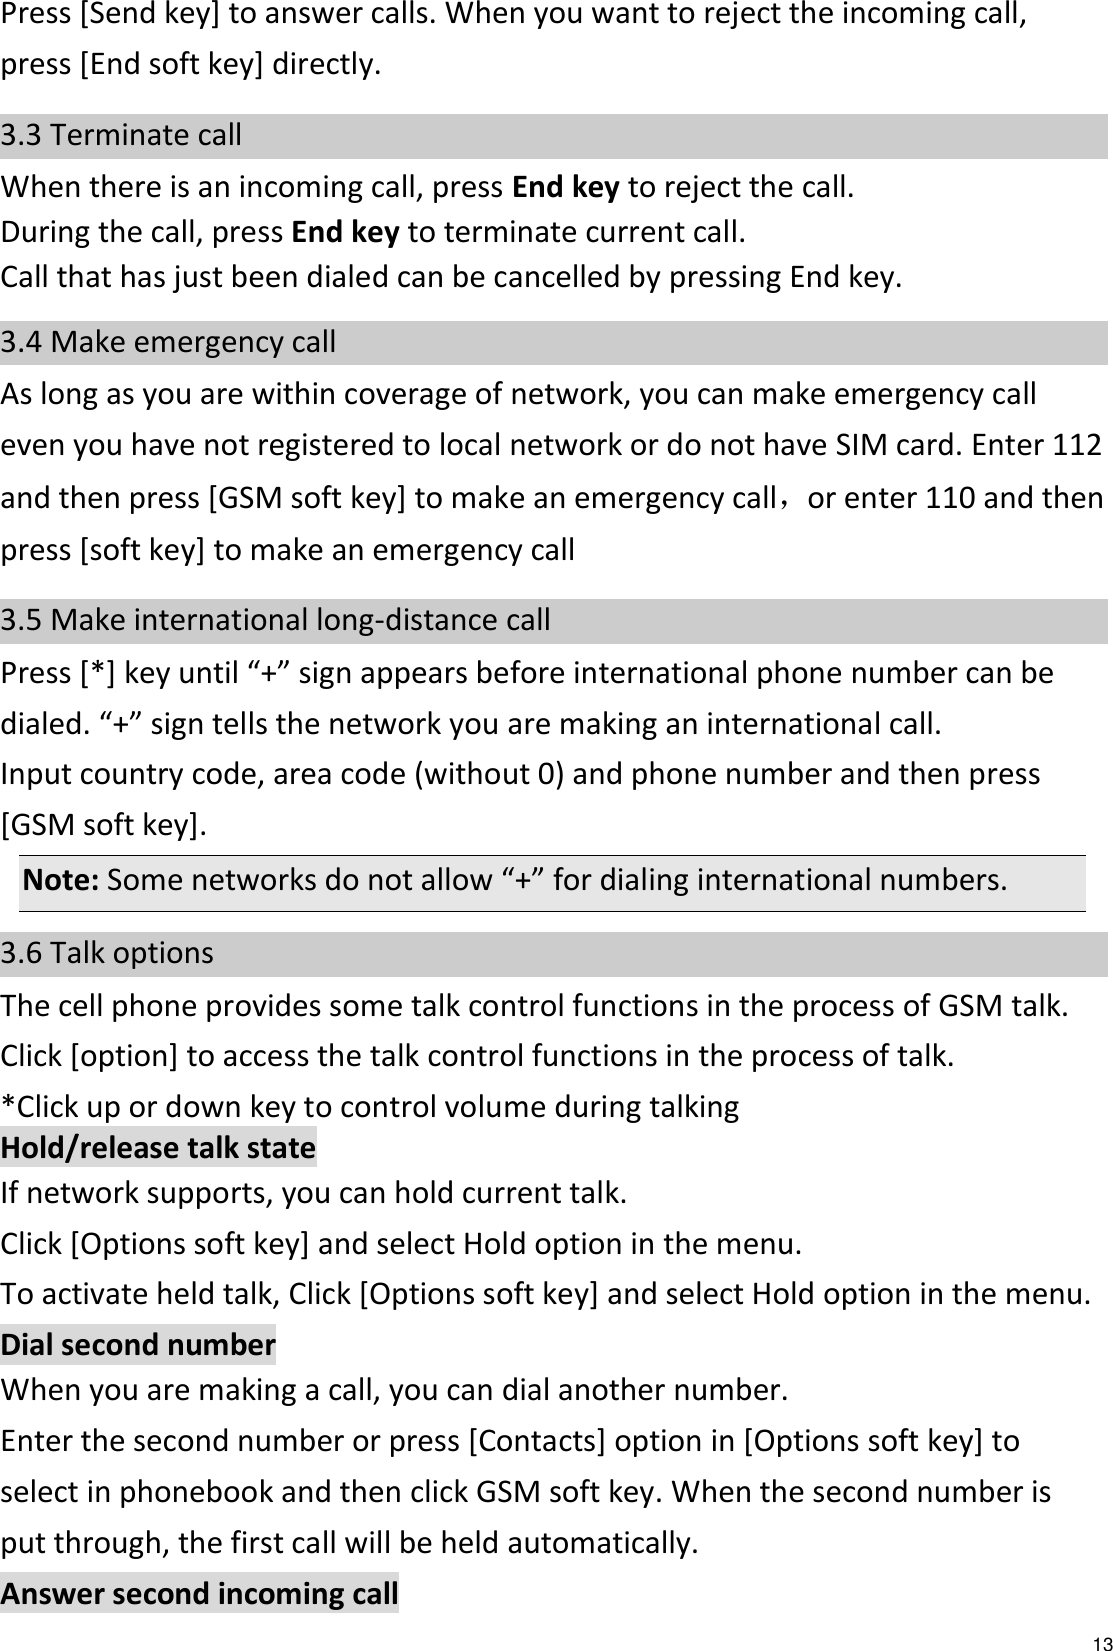   13 Press [Send key] to answer calls. When you want to reject the incoming call, press [End soft key] directly. 3.3 Terminate call When there is an incoming call, press End key to reject the call. During the call, press End key to terminate current call. Call that has just been dialed can be cancelled by pressing End key. 3.4 Make emergency call As long as you are within coverage of network, you can make emergency call even you have not registered to local network or do not have SIM card. Enter 112 and then press [GSM soft key] to make an emergency call，or enter 110 and then press [soft key] to make an emergency call 3.5 Make international long-distance call Press [*] key until “+” sign appears before international phone number can be dialed. “+” sign tells the network you are making an international call. Input country code, area code (without 0) and phone number and then press [GSM soft key]. Note: Some networks do not allow “+” for dialing international numbers. 3.6 Talk options The cell phone provides some talk control functions in the process of GSM talk. Click [option] to access the talk control functions in the process of talk. *Click up or down key to control volume during talking   Hold/release talk state If network supports, you can hold current talk. Click [Options soft key] and select Hold option in the menu. To activate held talk, Click [Options soft key] and select Hold option in the menu. Dial second number When you are making a call, you can dial another number.   Enter the second number or press [Contacts] option in [Options soft key] to select in phonebook and then click GSM soft key. When the second number is put through, the first call will be held automatically. Answer second incoming call 